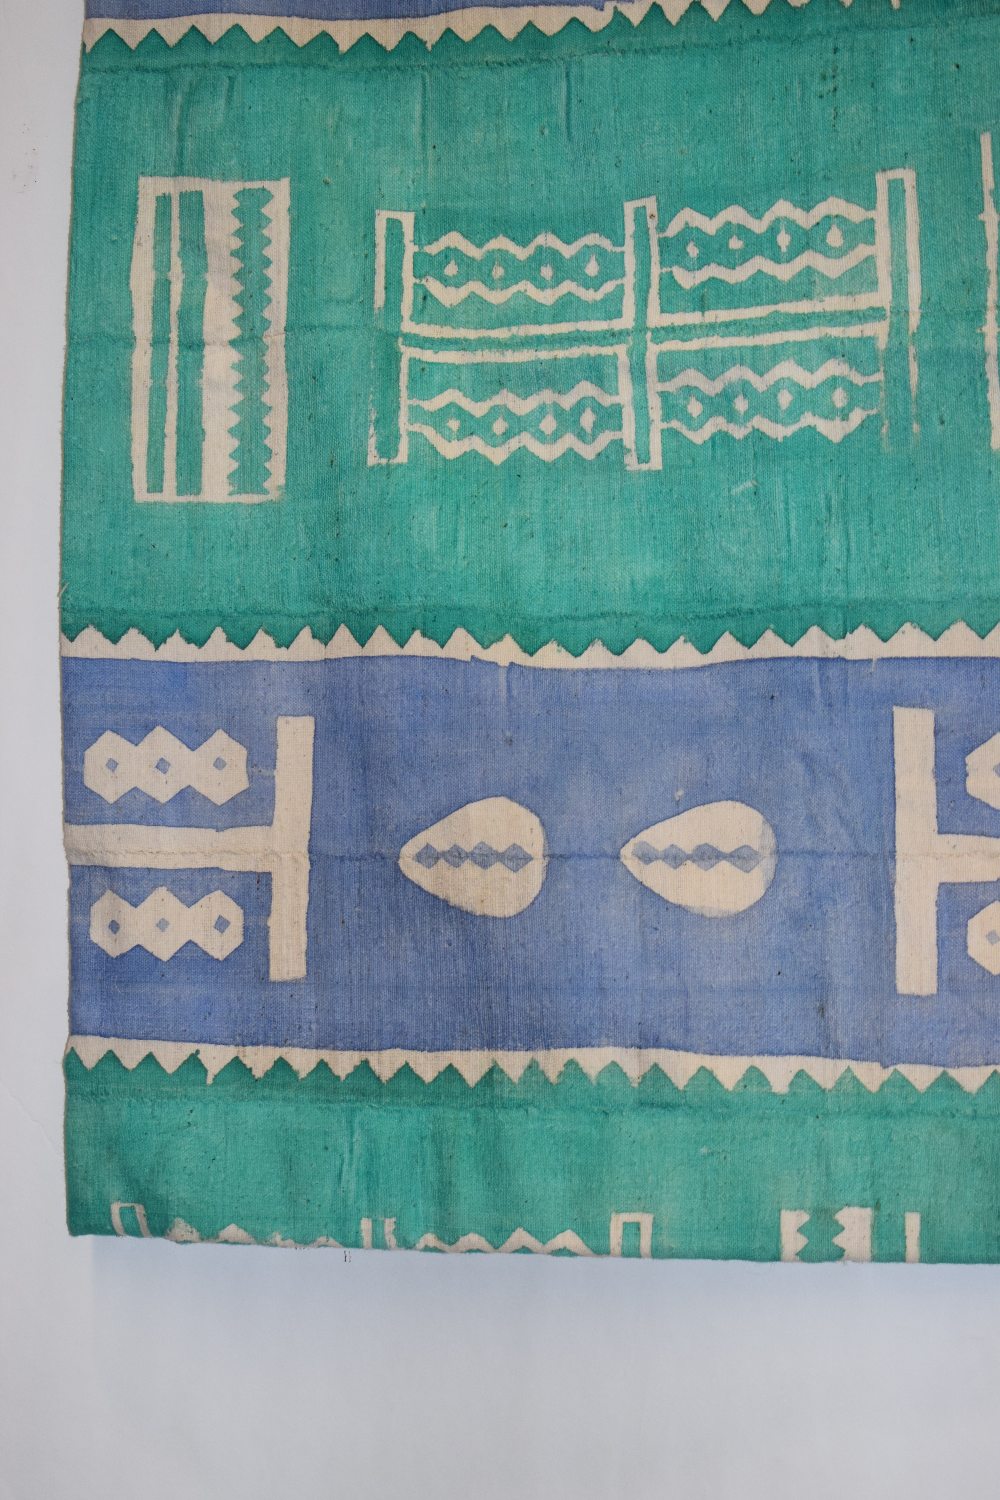 Five African 'Mud' or Bogolan cloths, Mali, west Africa, 20th century, the cotton strips dyed in - Image 12 of 22